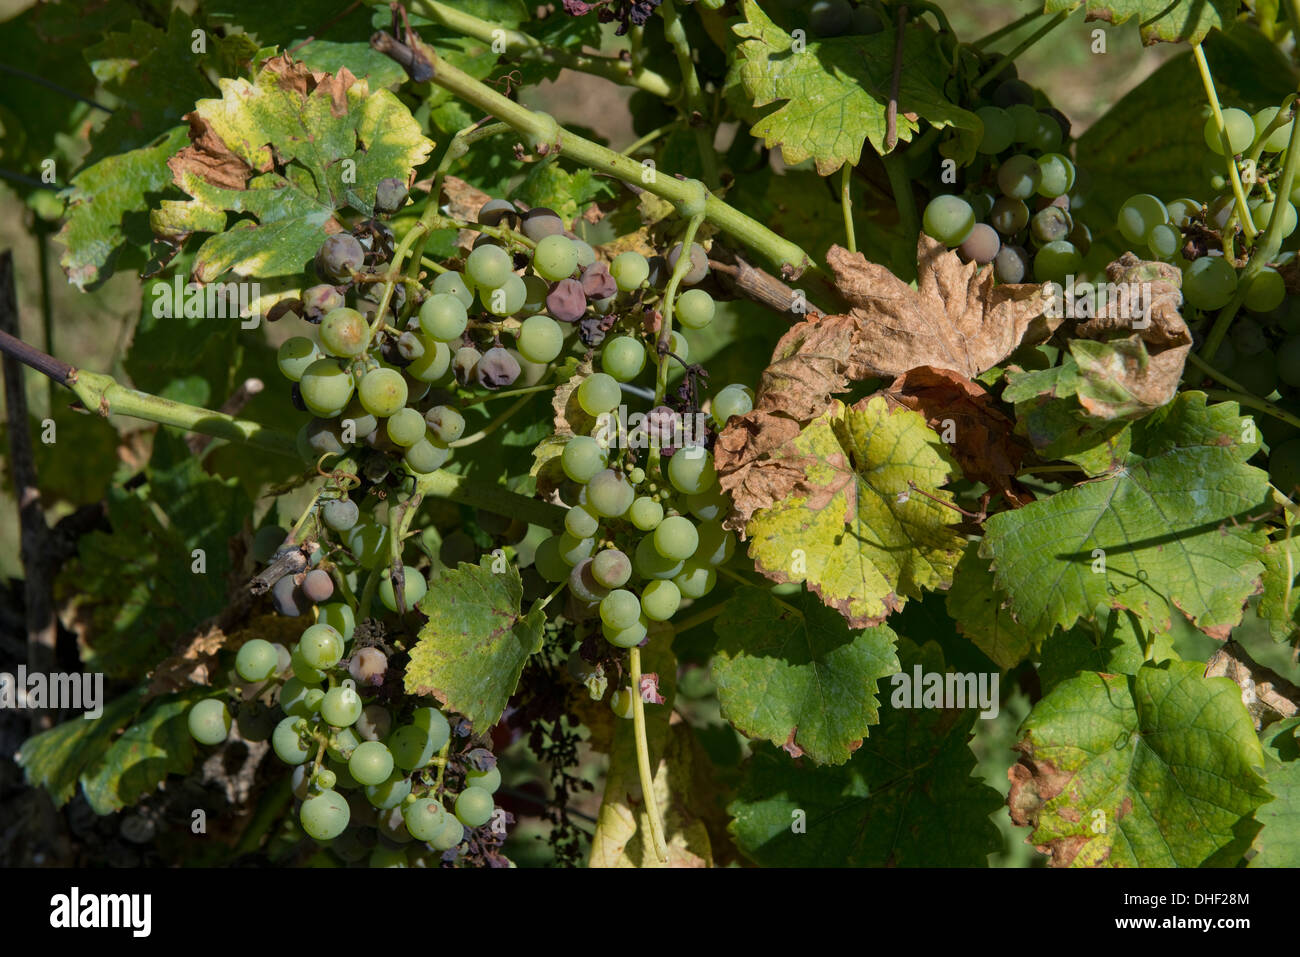 Noble rot or grey mould, Botrytis cinerea, affecting maturing grapes on the vine Stock Photo